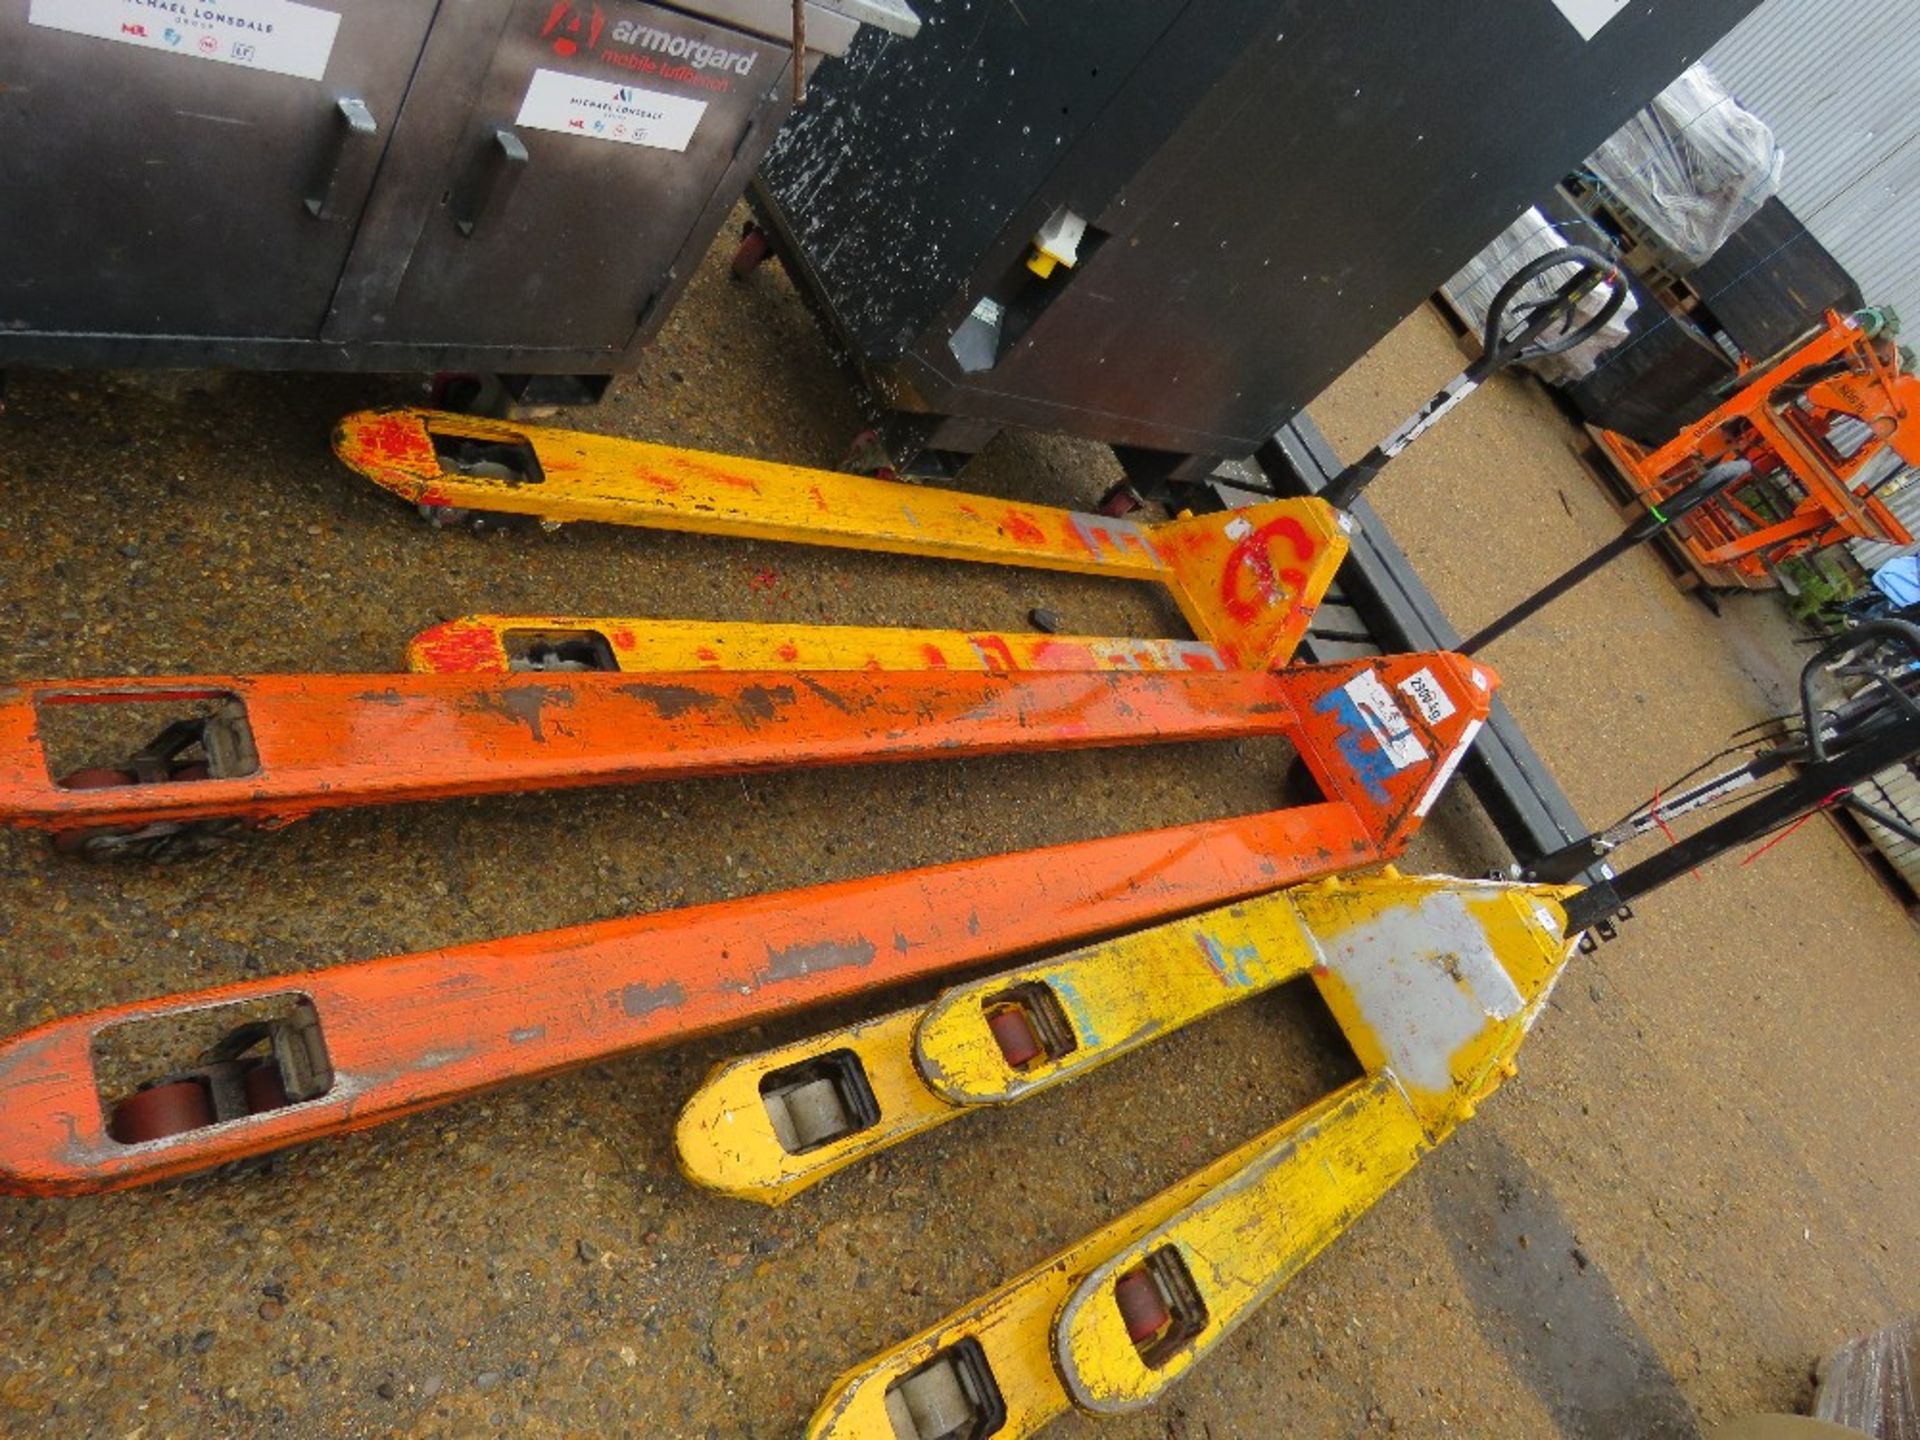 1 X PALLET TRUCK, 2.5M LENGTH BLADES. SOURCED FROM LARGE CONSTRUCTION COMPANY LIQUIDATION.